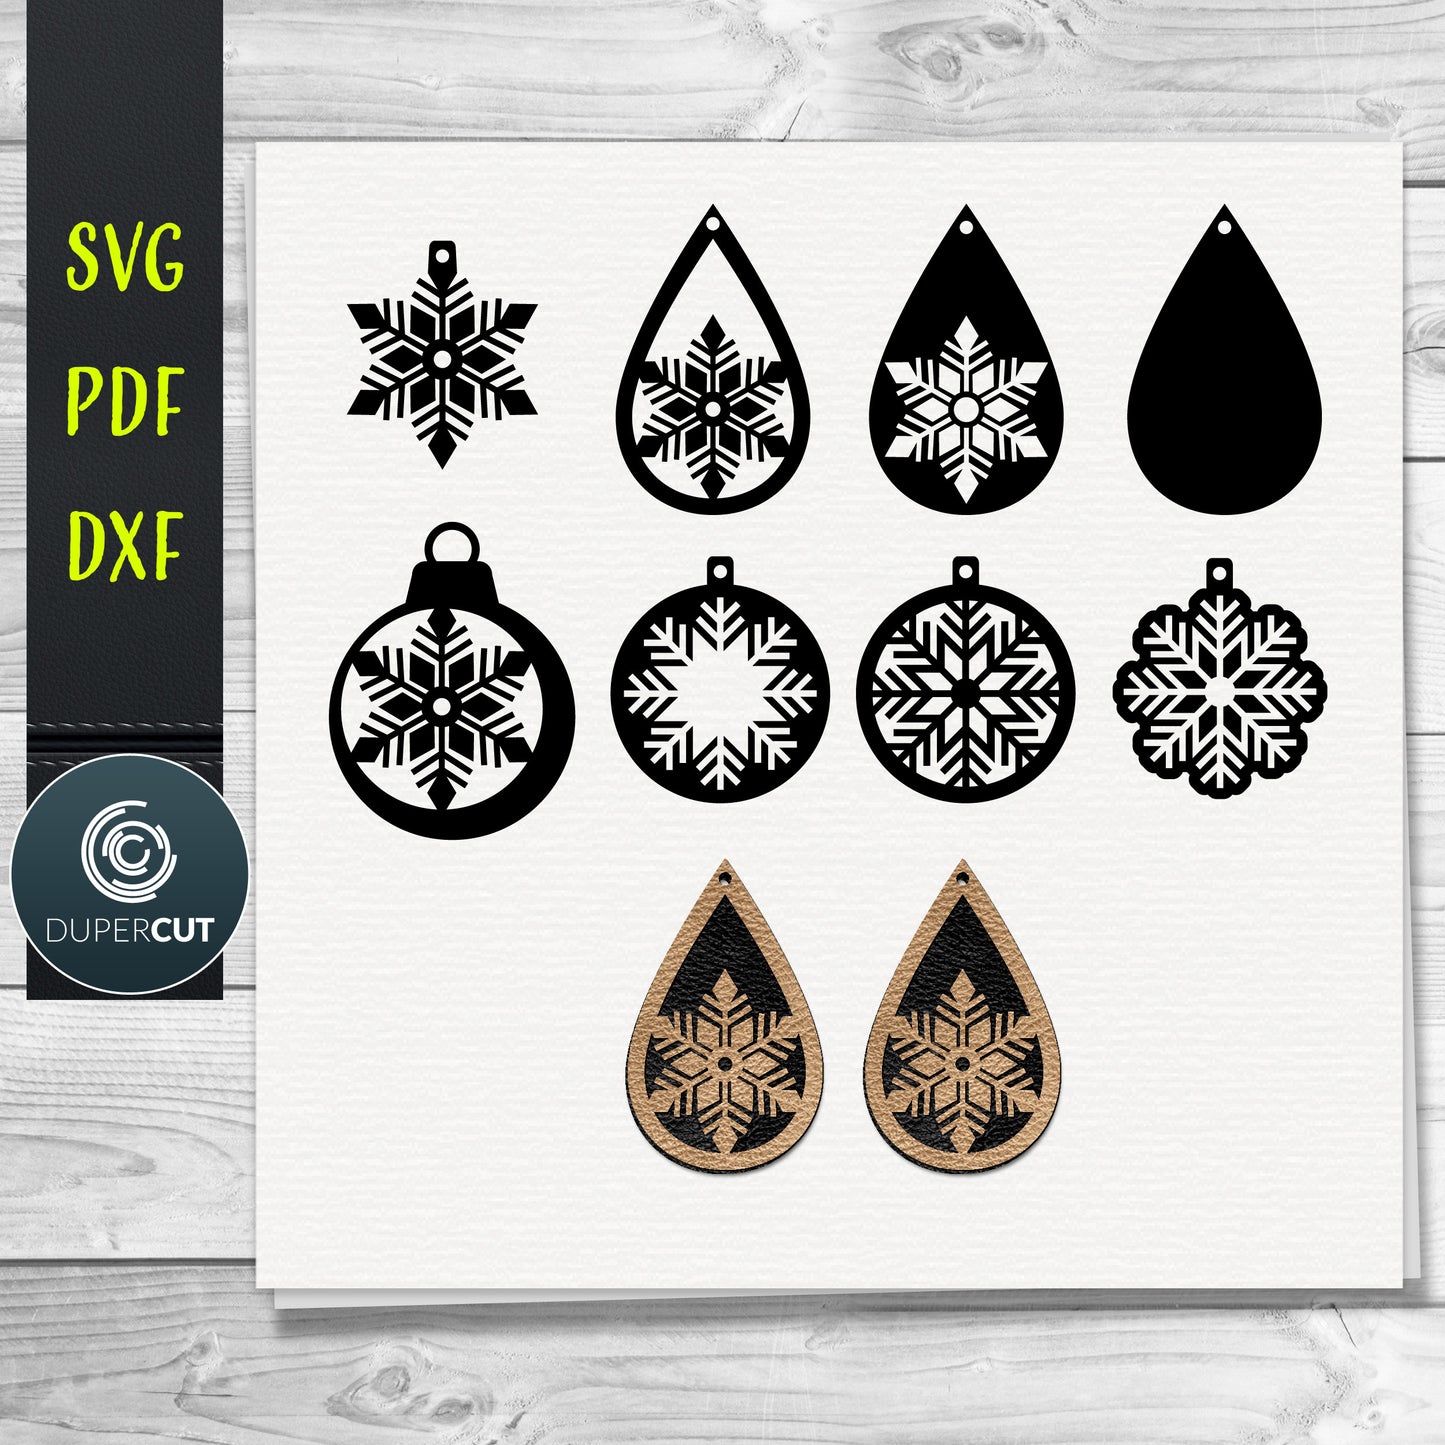 DIY Snowflakes Layered Leather Earrings SVG PDF DXF vector files. Jewellery making template for laser and cutting machines - Glowforge, Cricut, Silhouette Cameo.